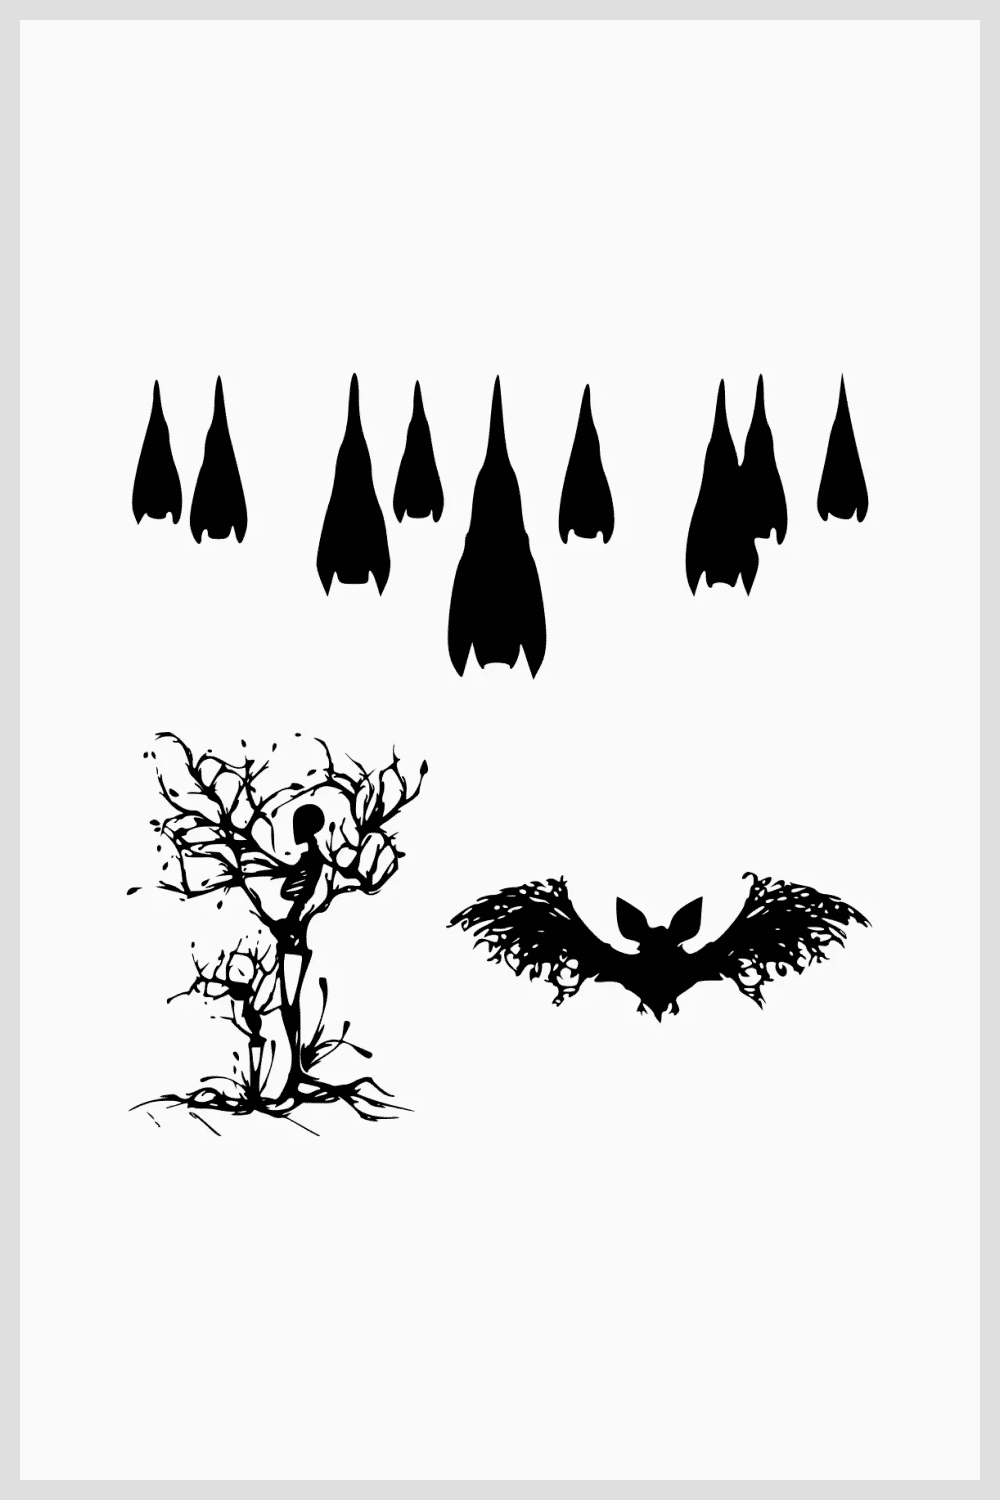 Collage of images of a skeleton and bats.